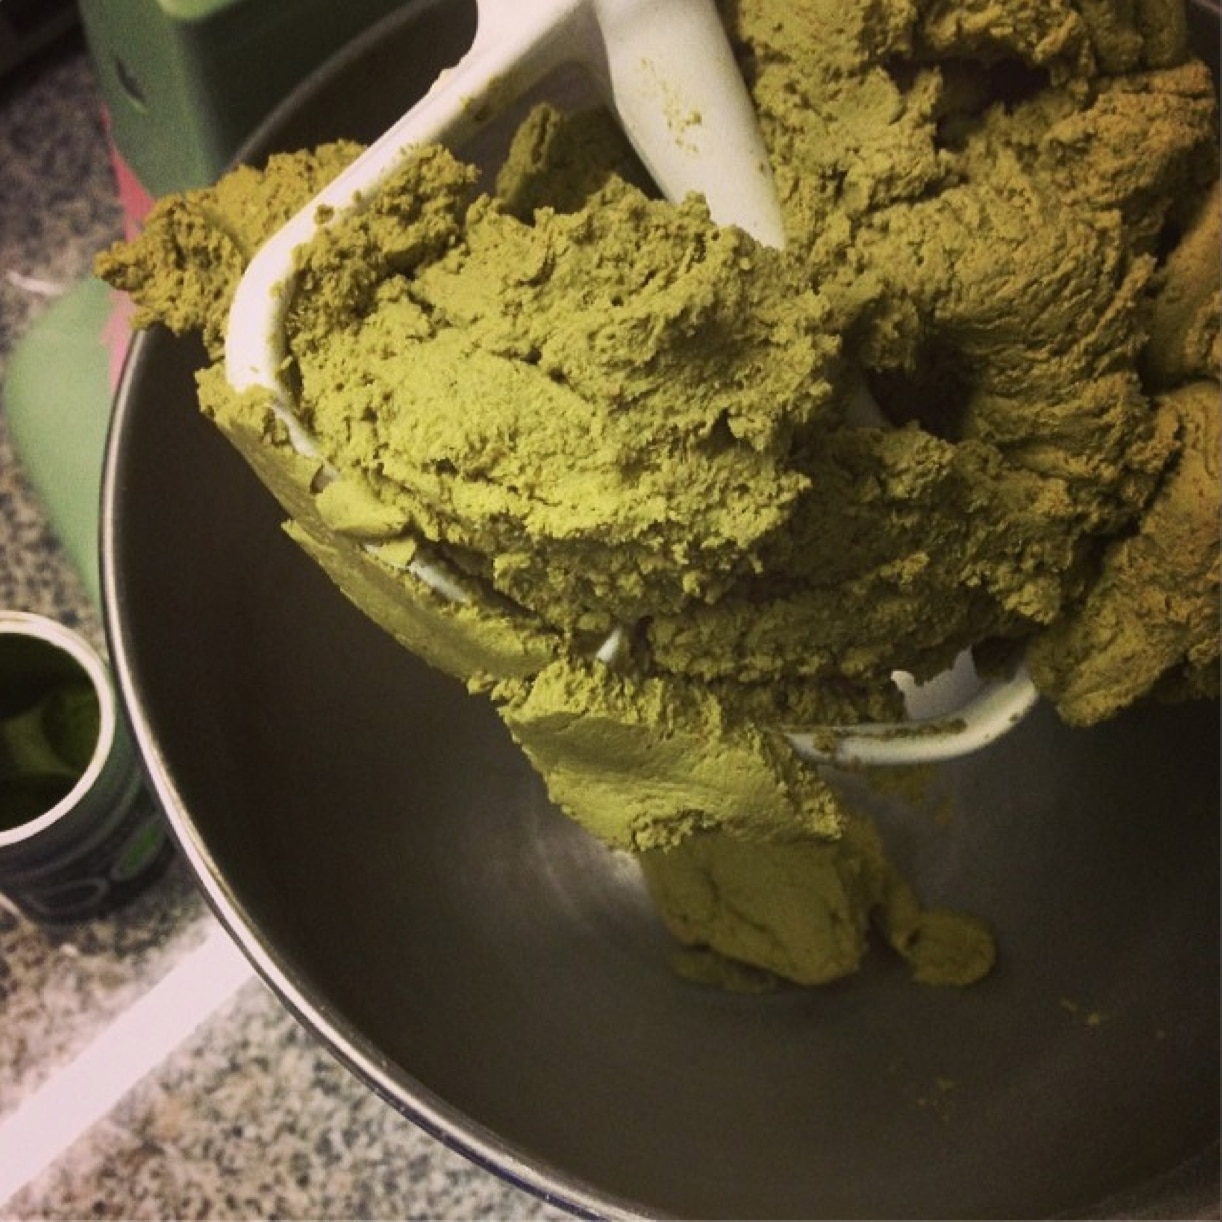 Healthy Matcha Green Tea DIY Protein Bars being made in a stand mixer - Healthy Dessert Recipes at Desserts with Benefits